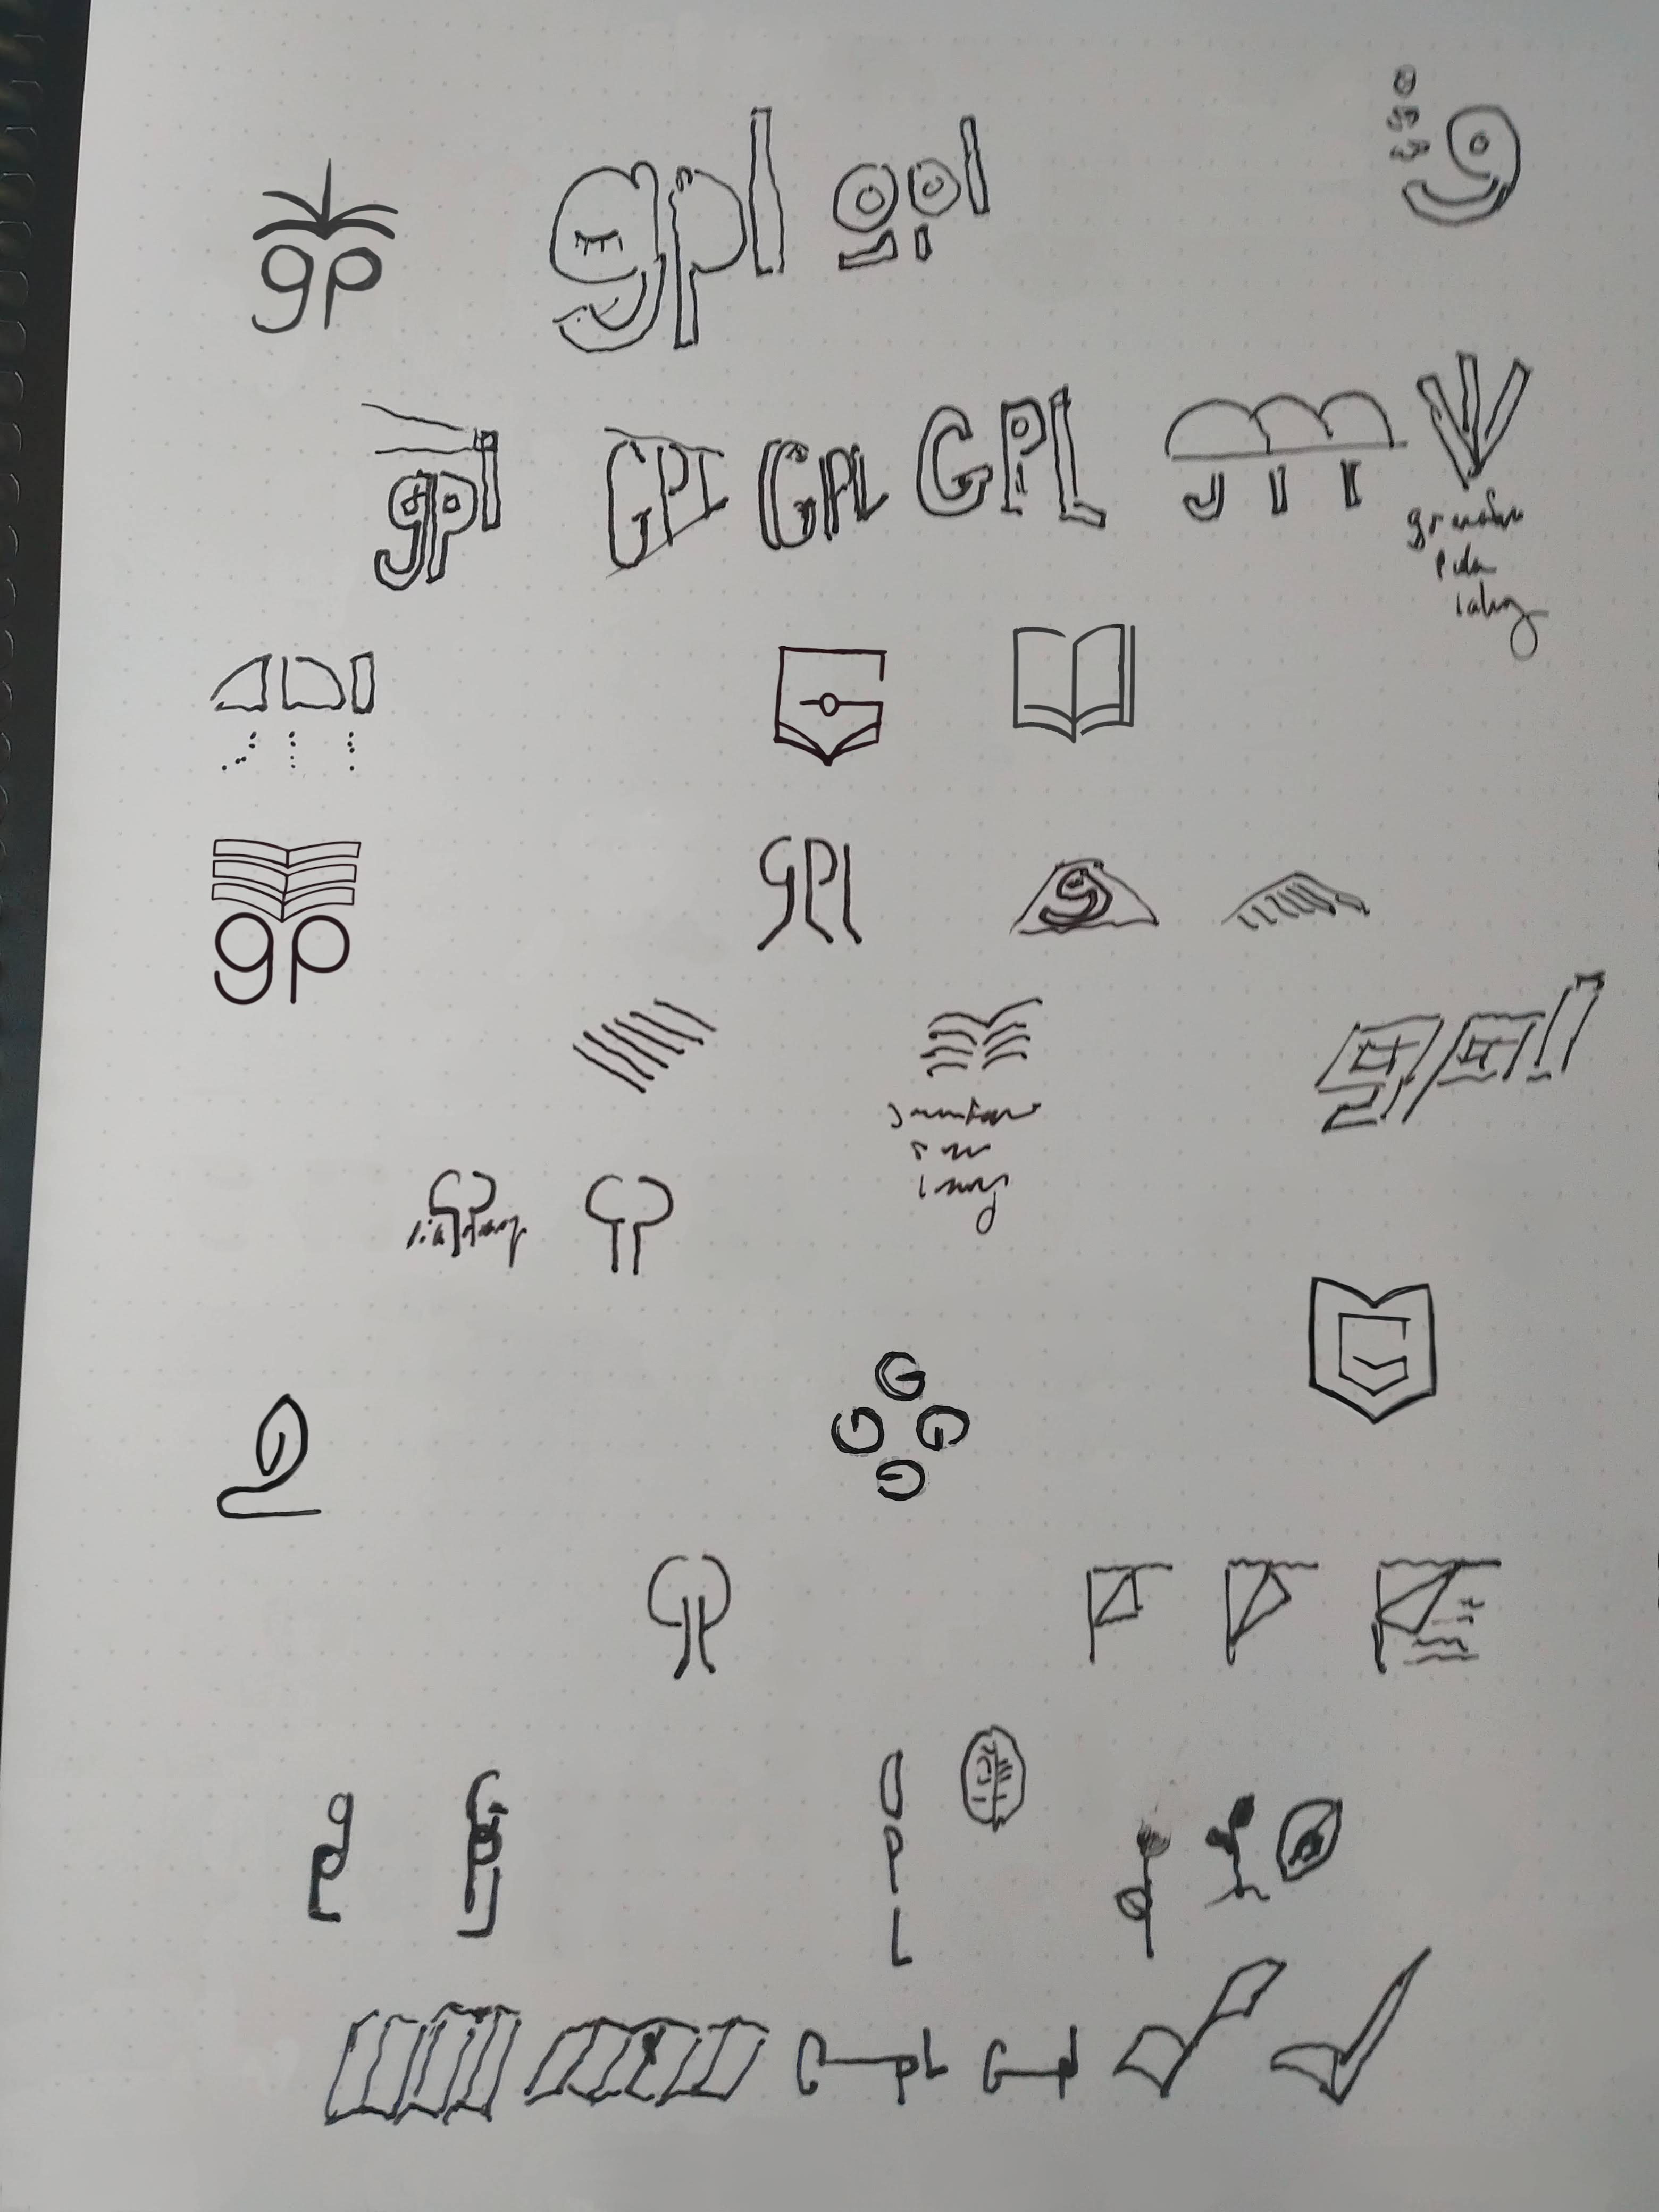 visual of page of illustrated logo early ideas